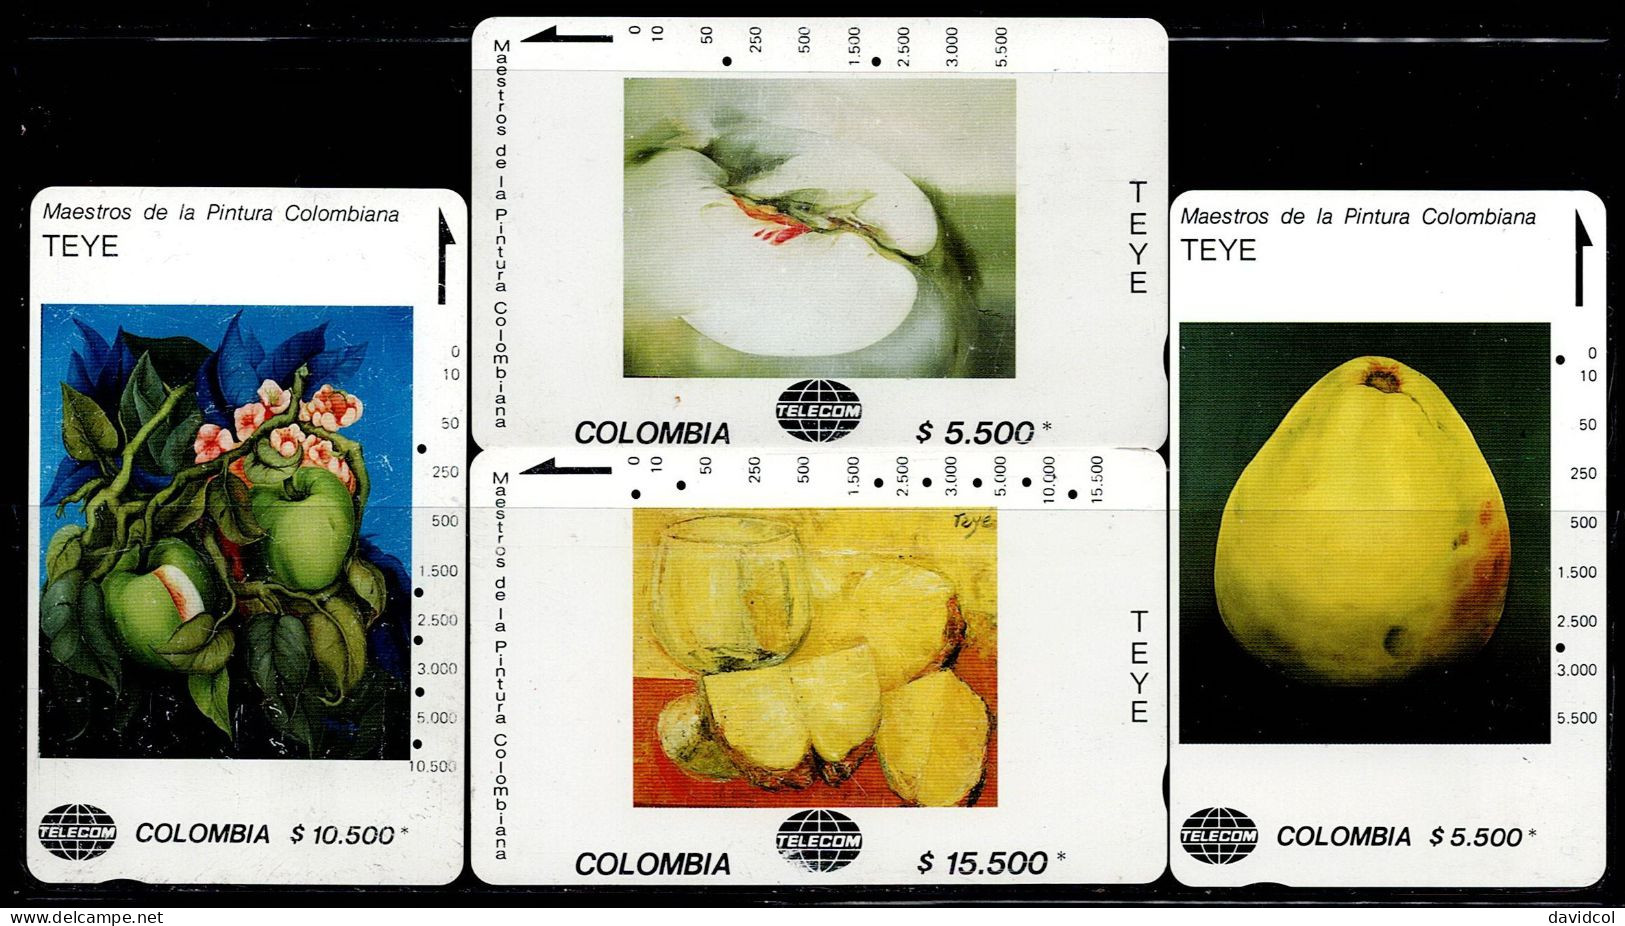 TT10-COLOMBIA TAMURA CARDS 1990's - USED SET MASTER PAINTERS - TEYE - Colombia